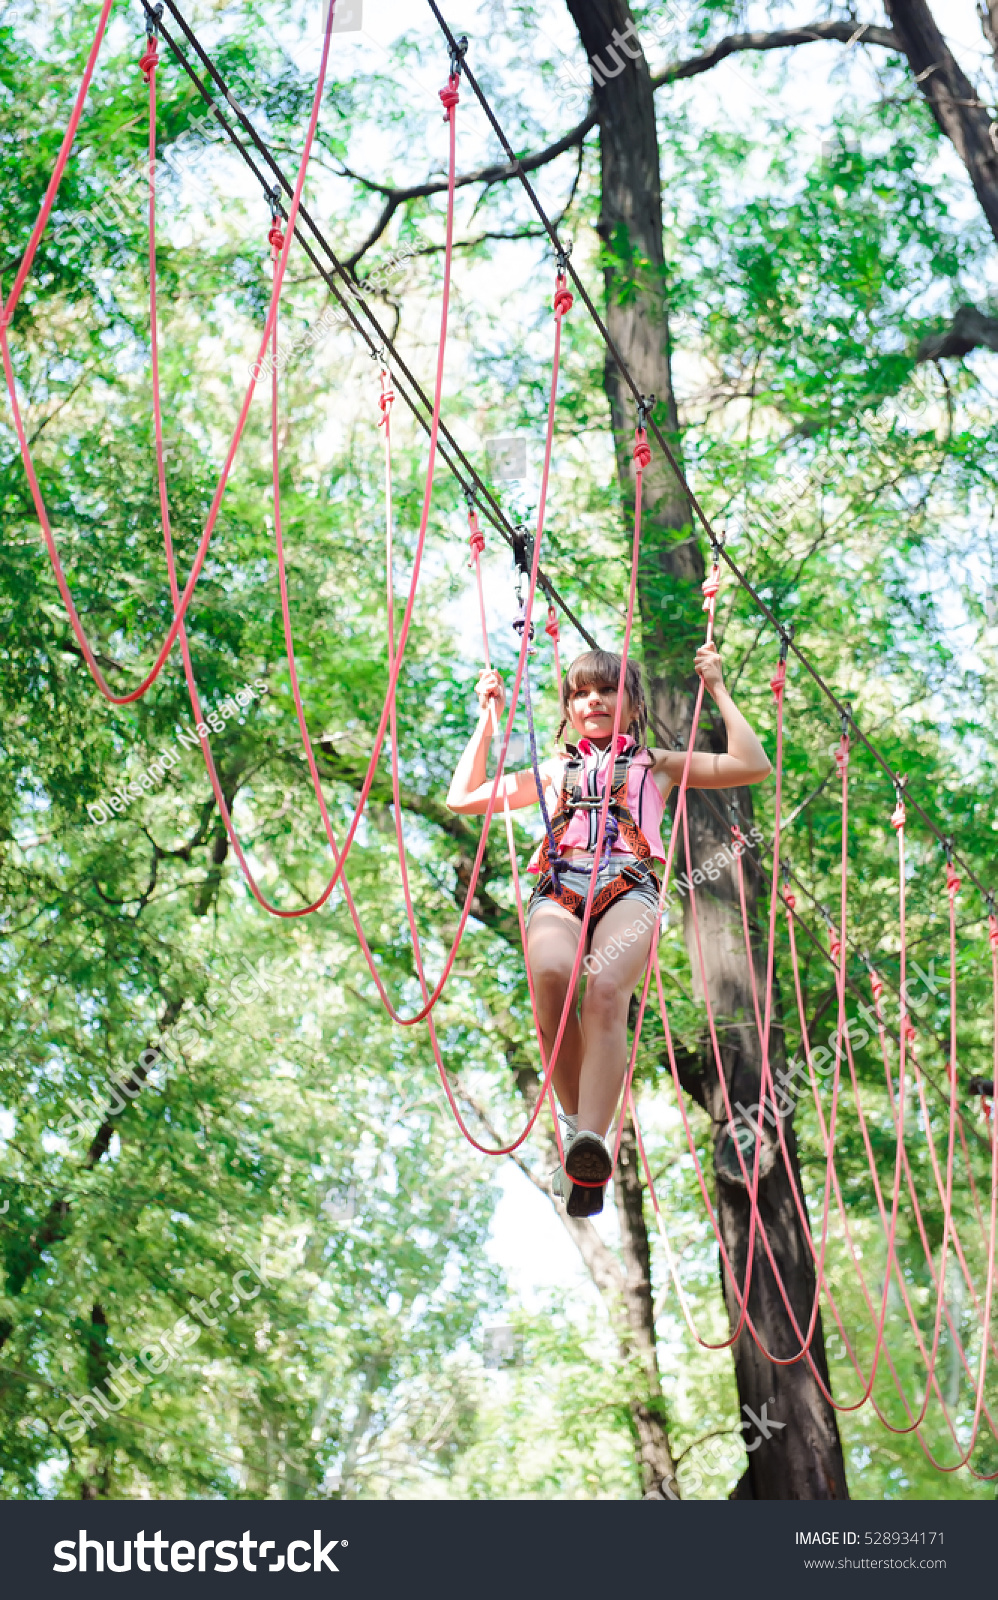 adventure climbing high wire park - hiking in the rope park girl in safety equipment #528934171